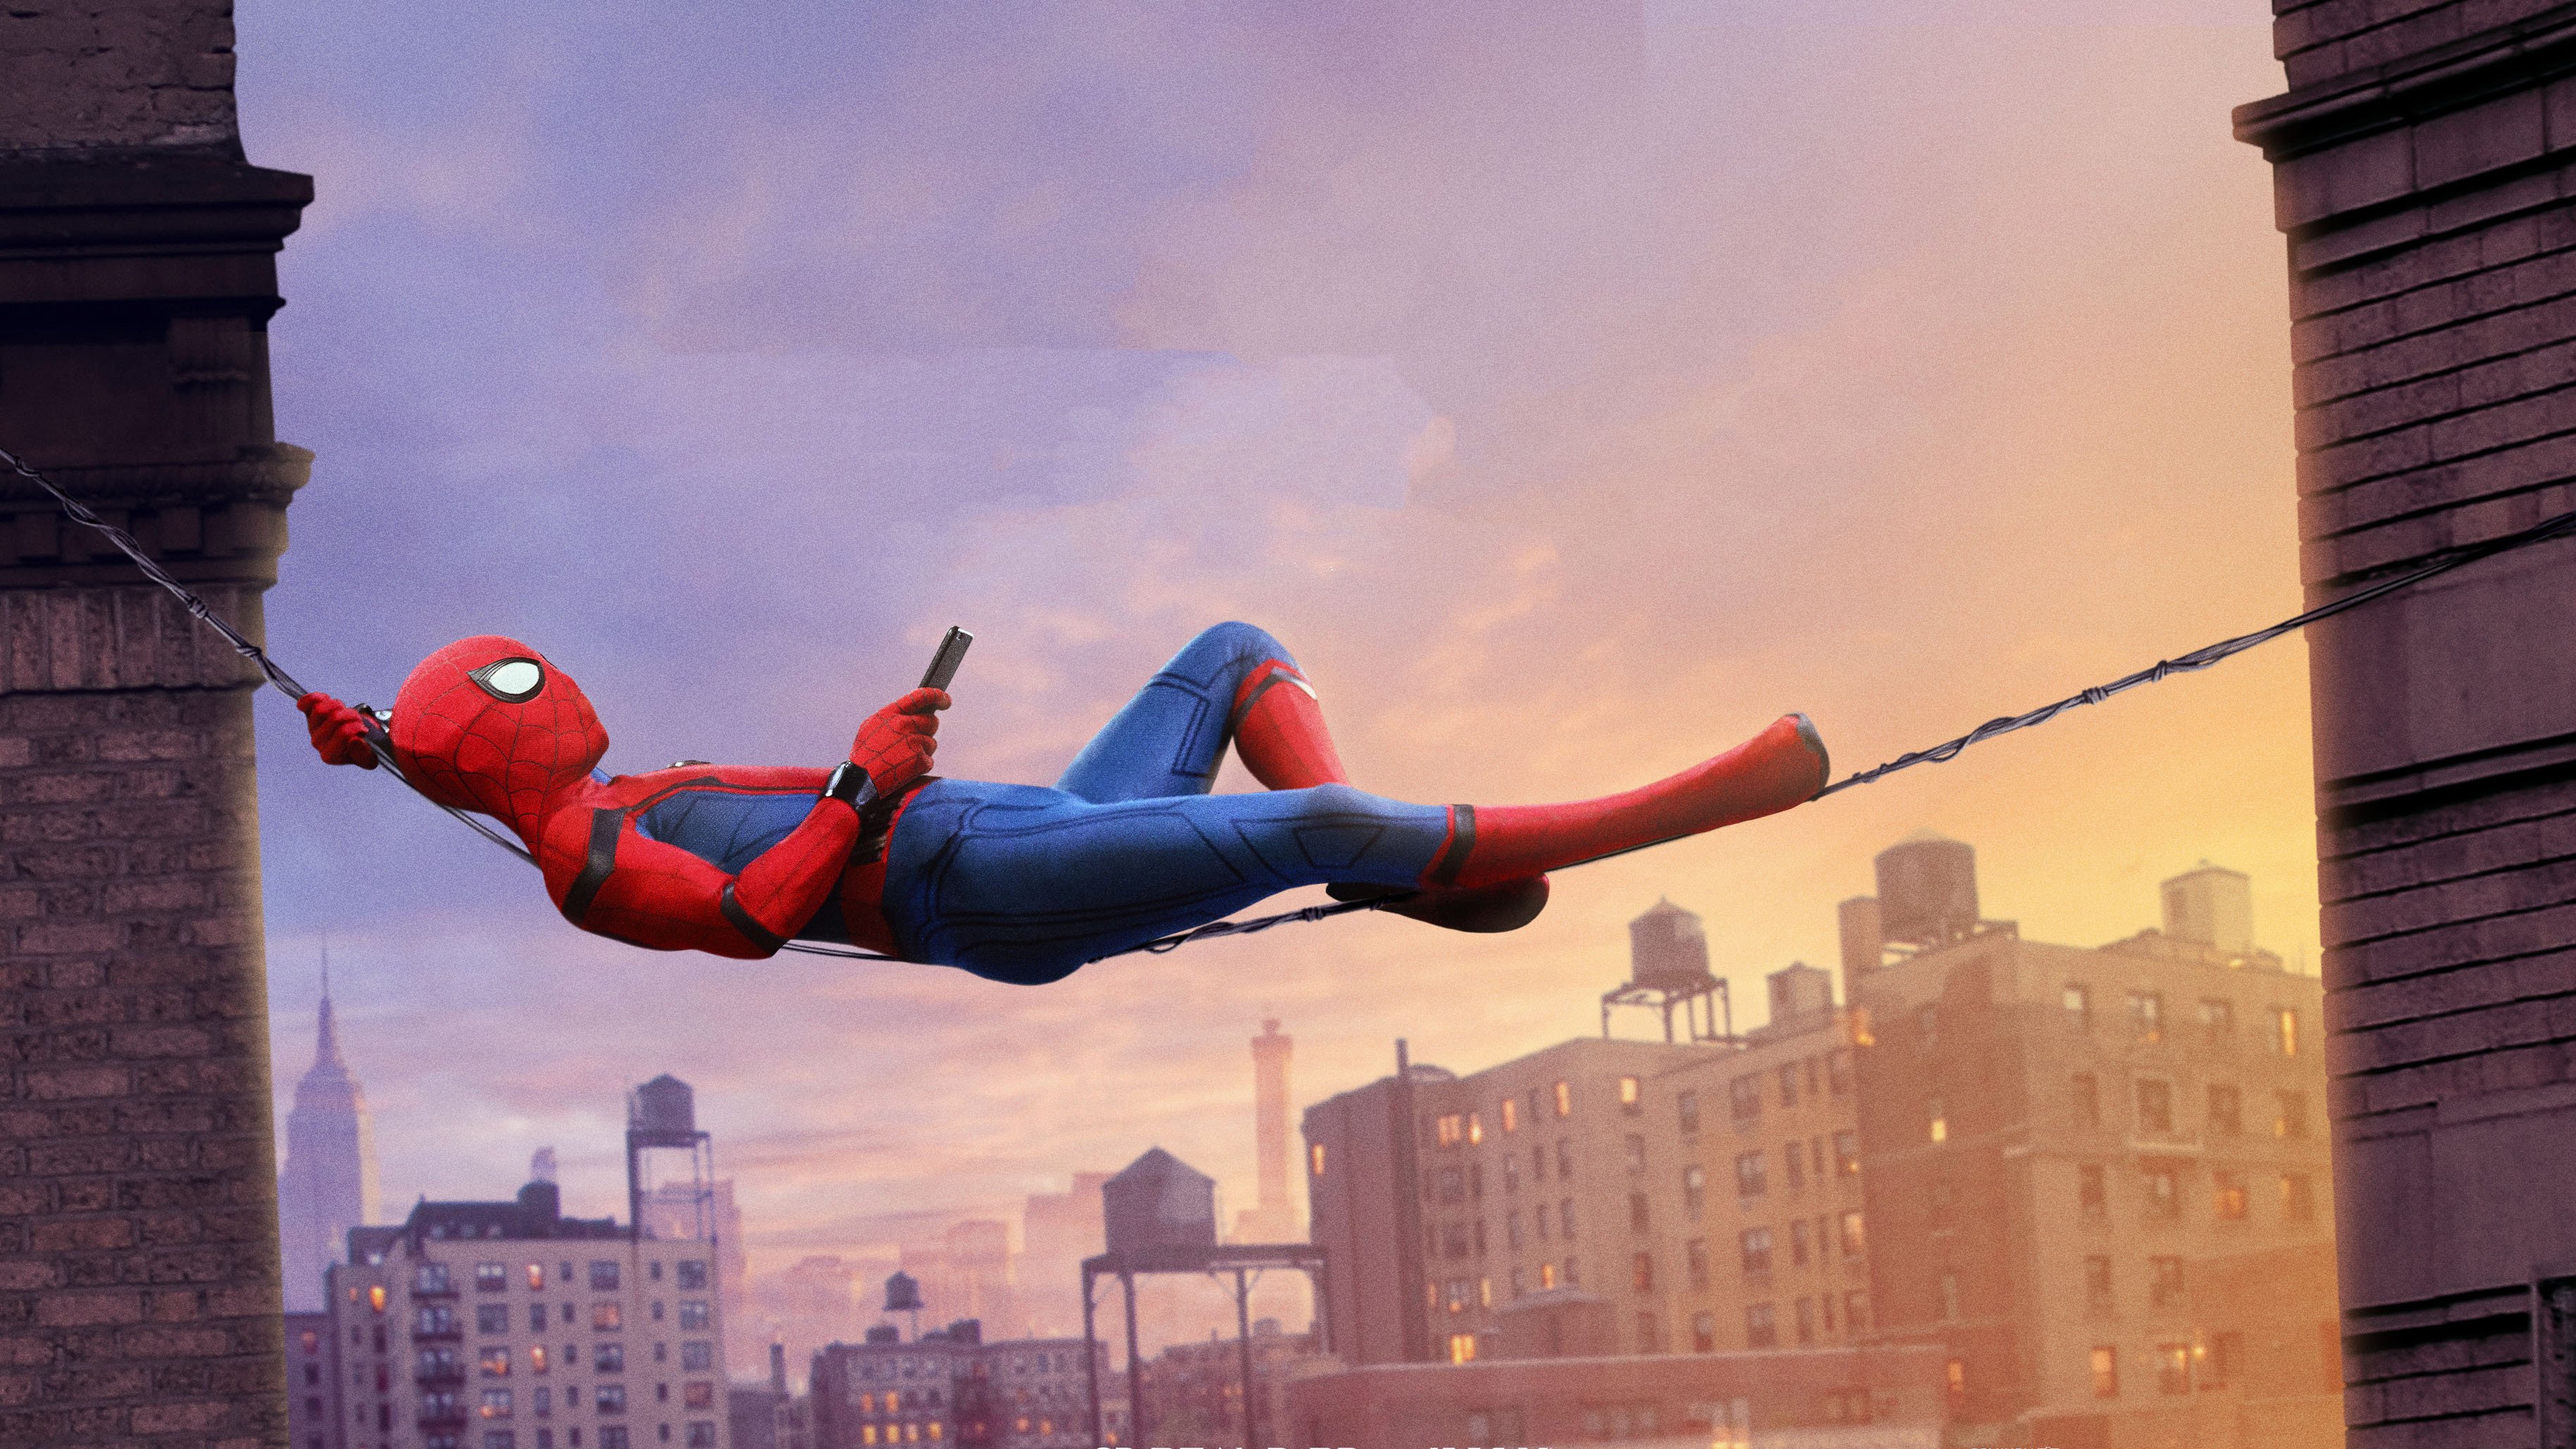 Spider Man: Homecoming Wallpaper. HD Background Image